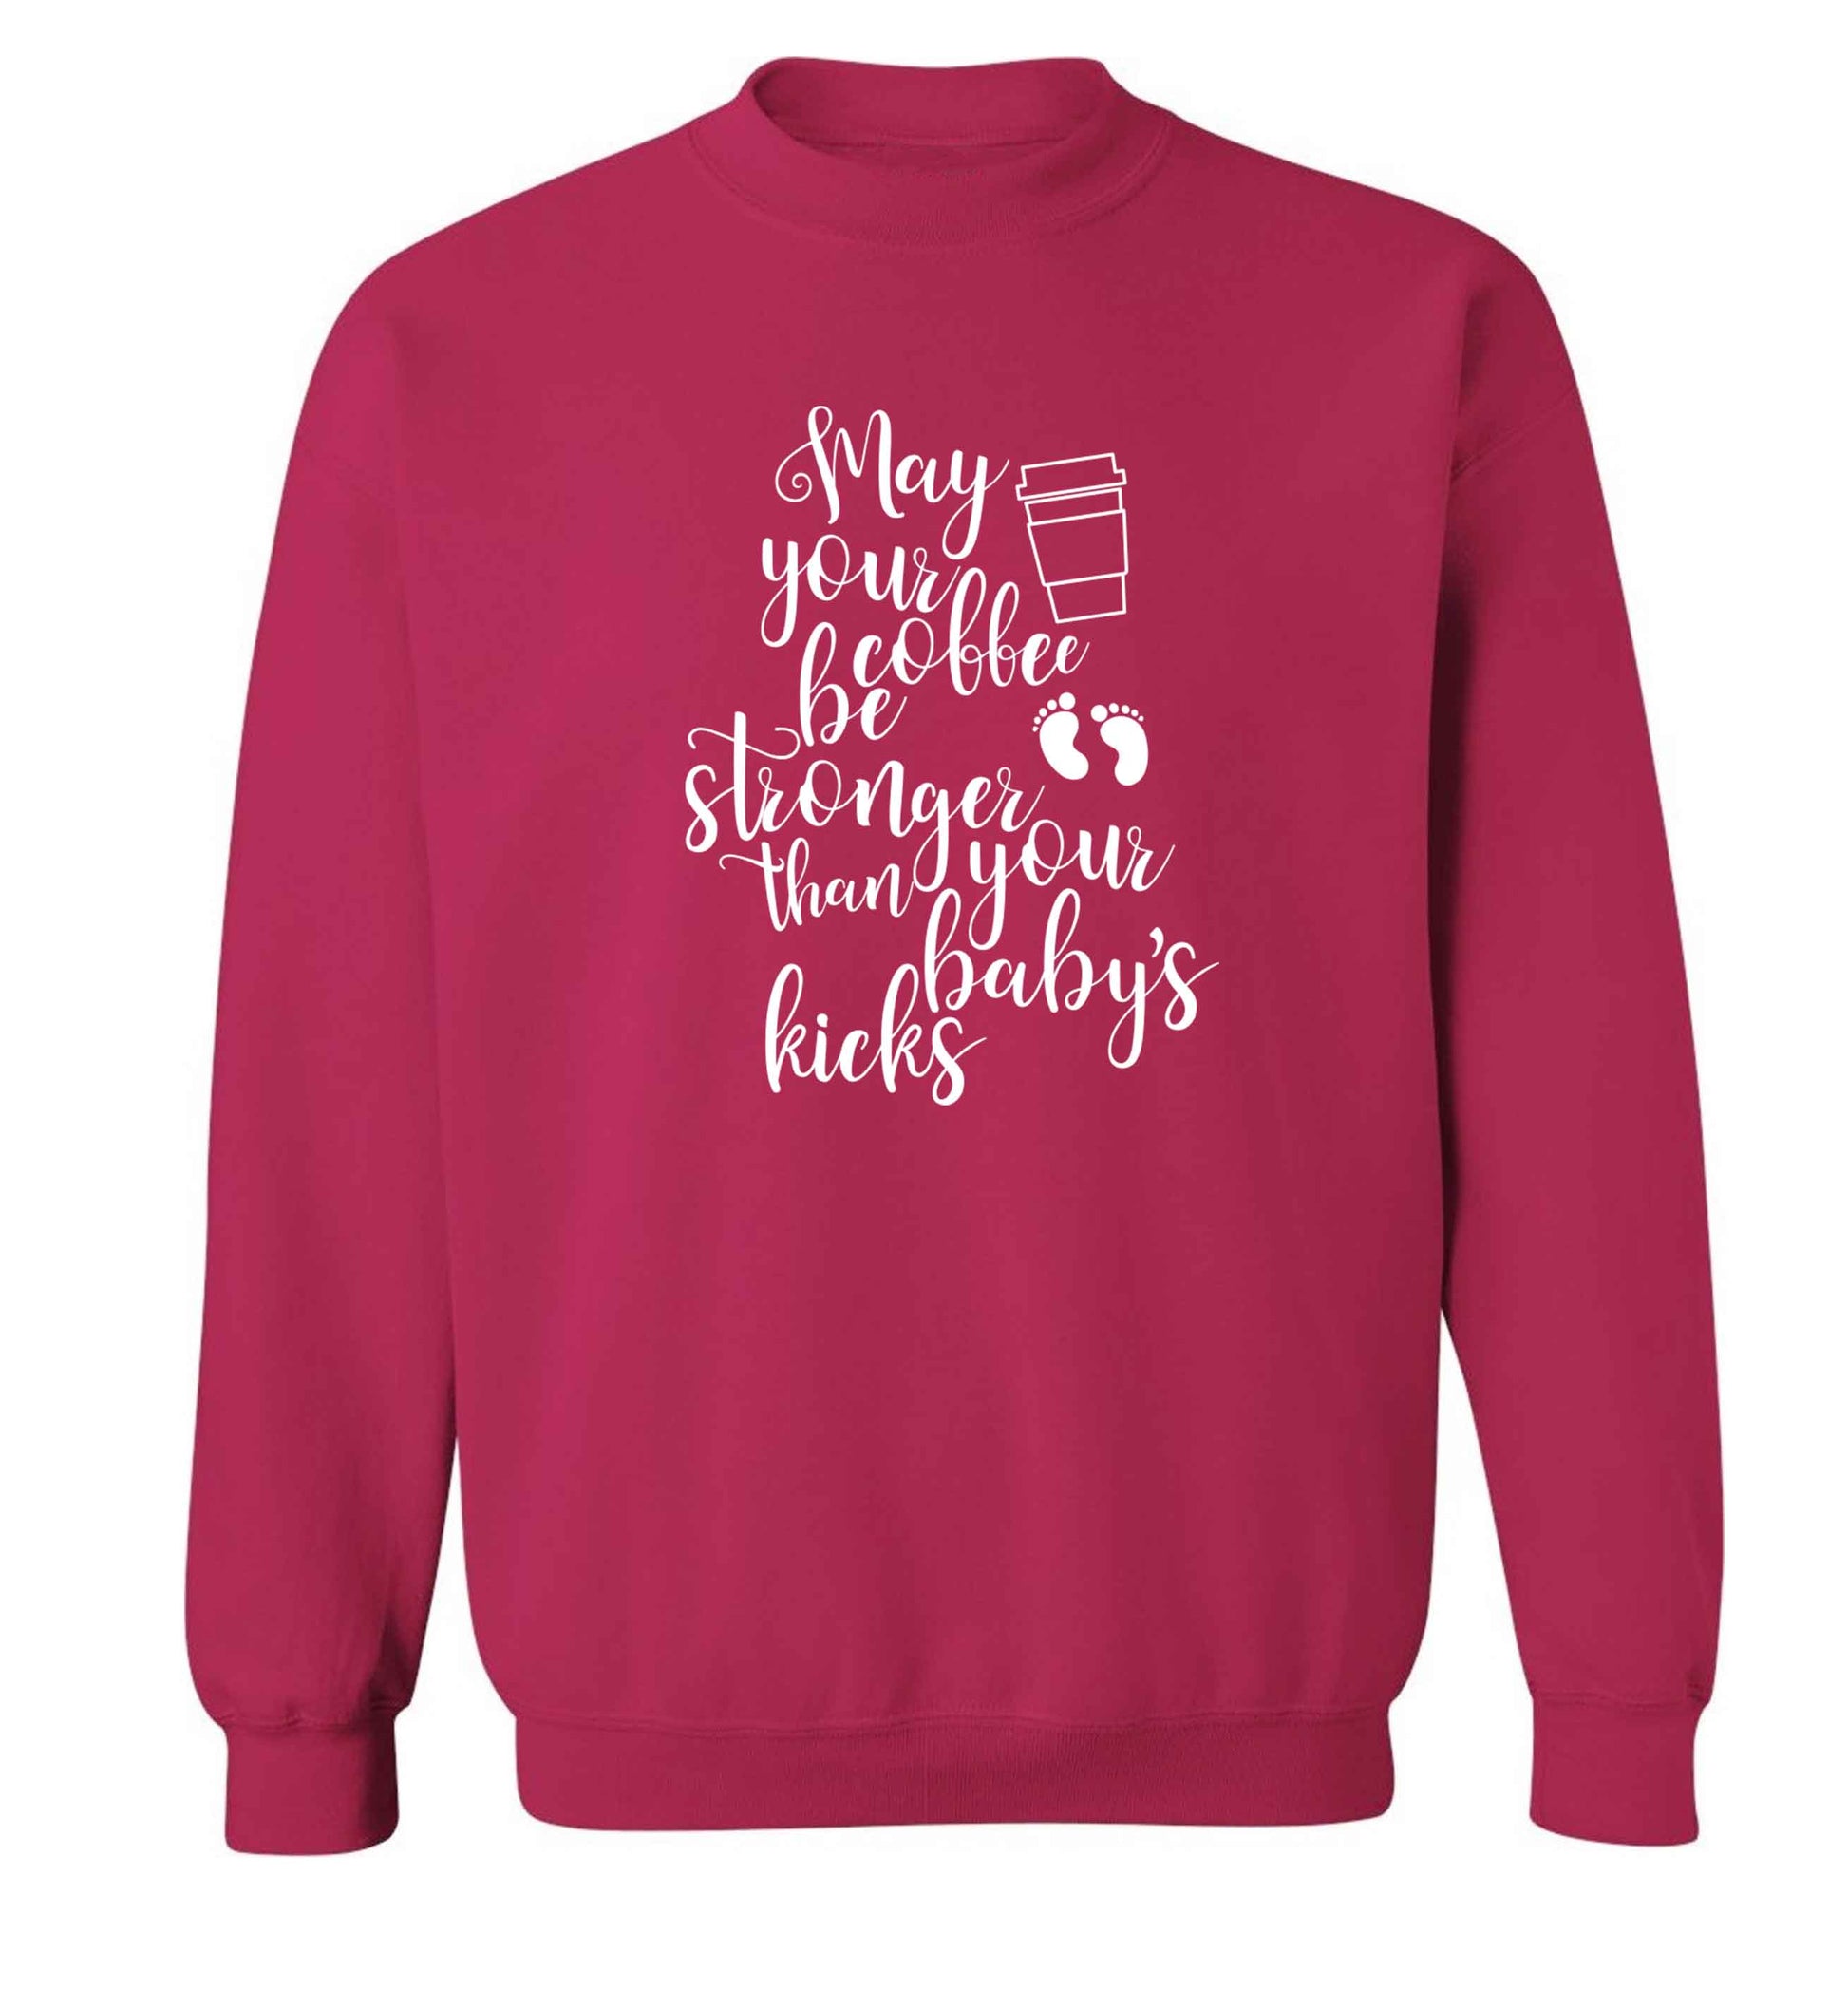 May your coffee be stronger than your babies kicks Adult's unisex pink Sweater 2XL